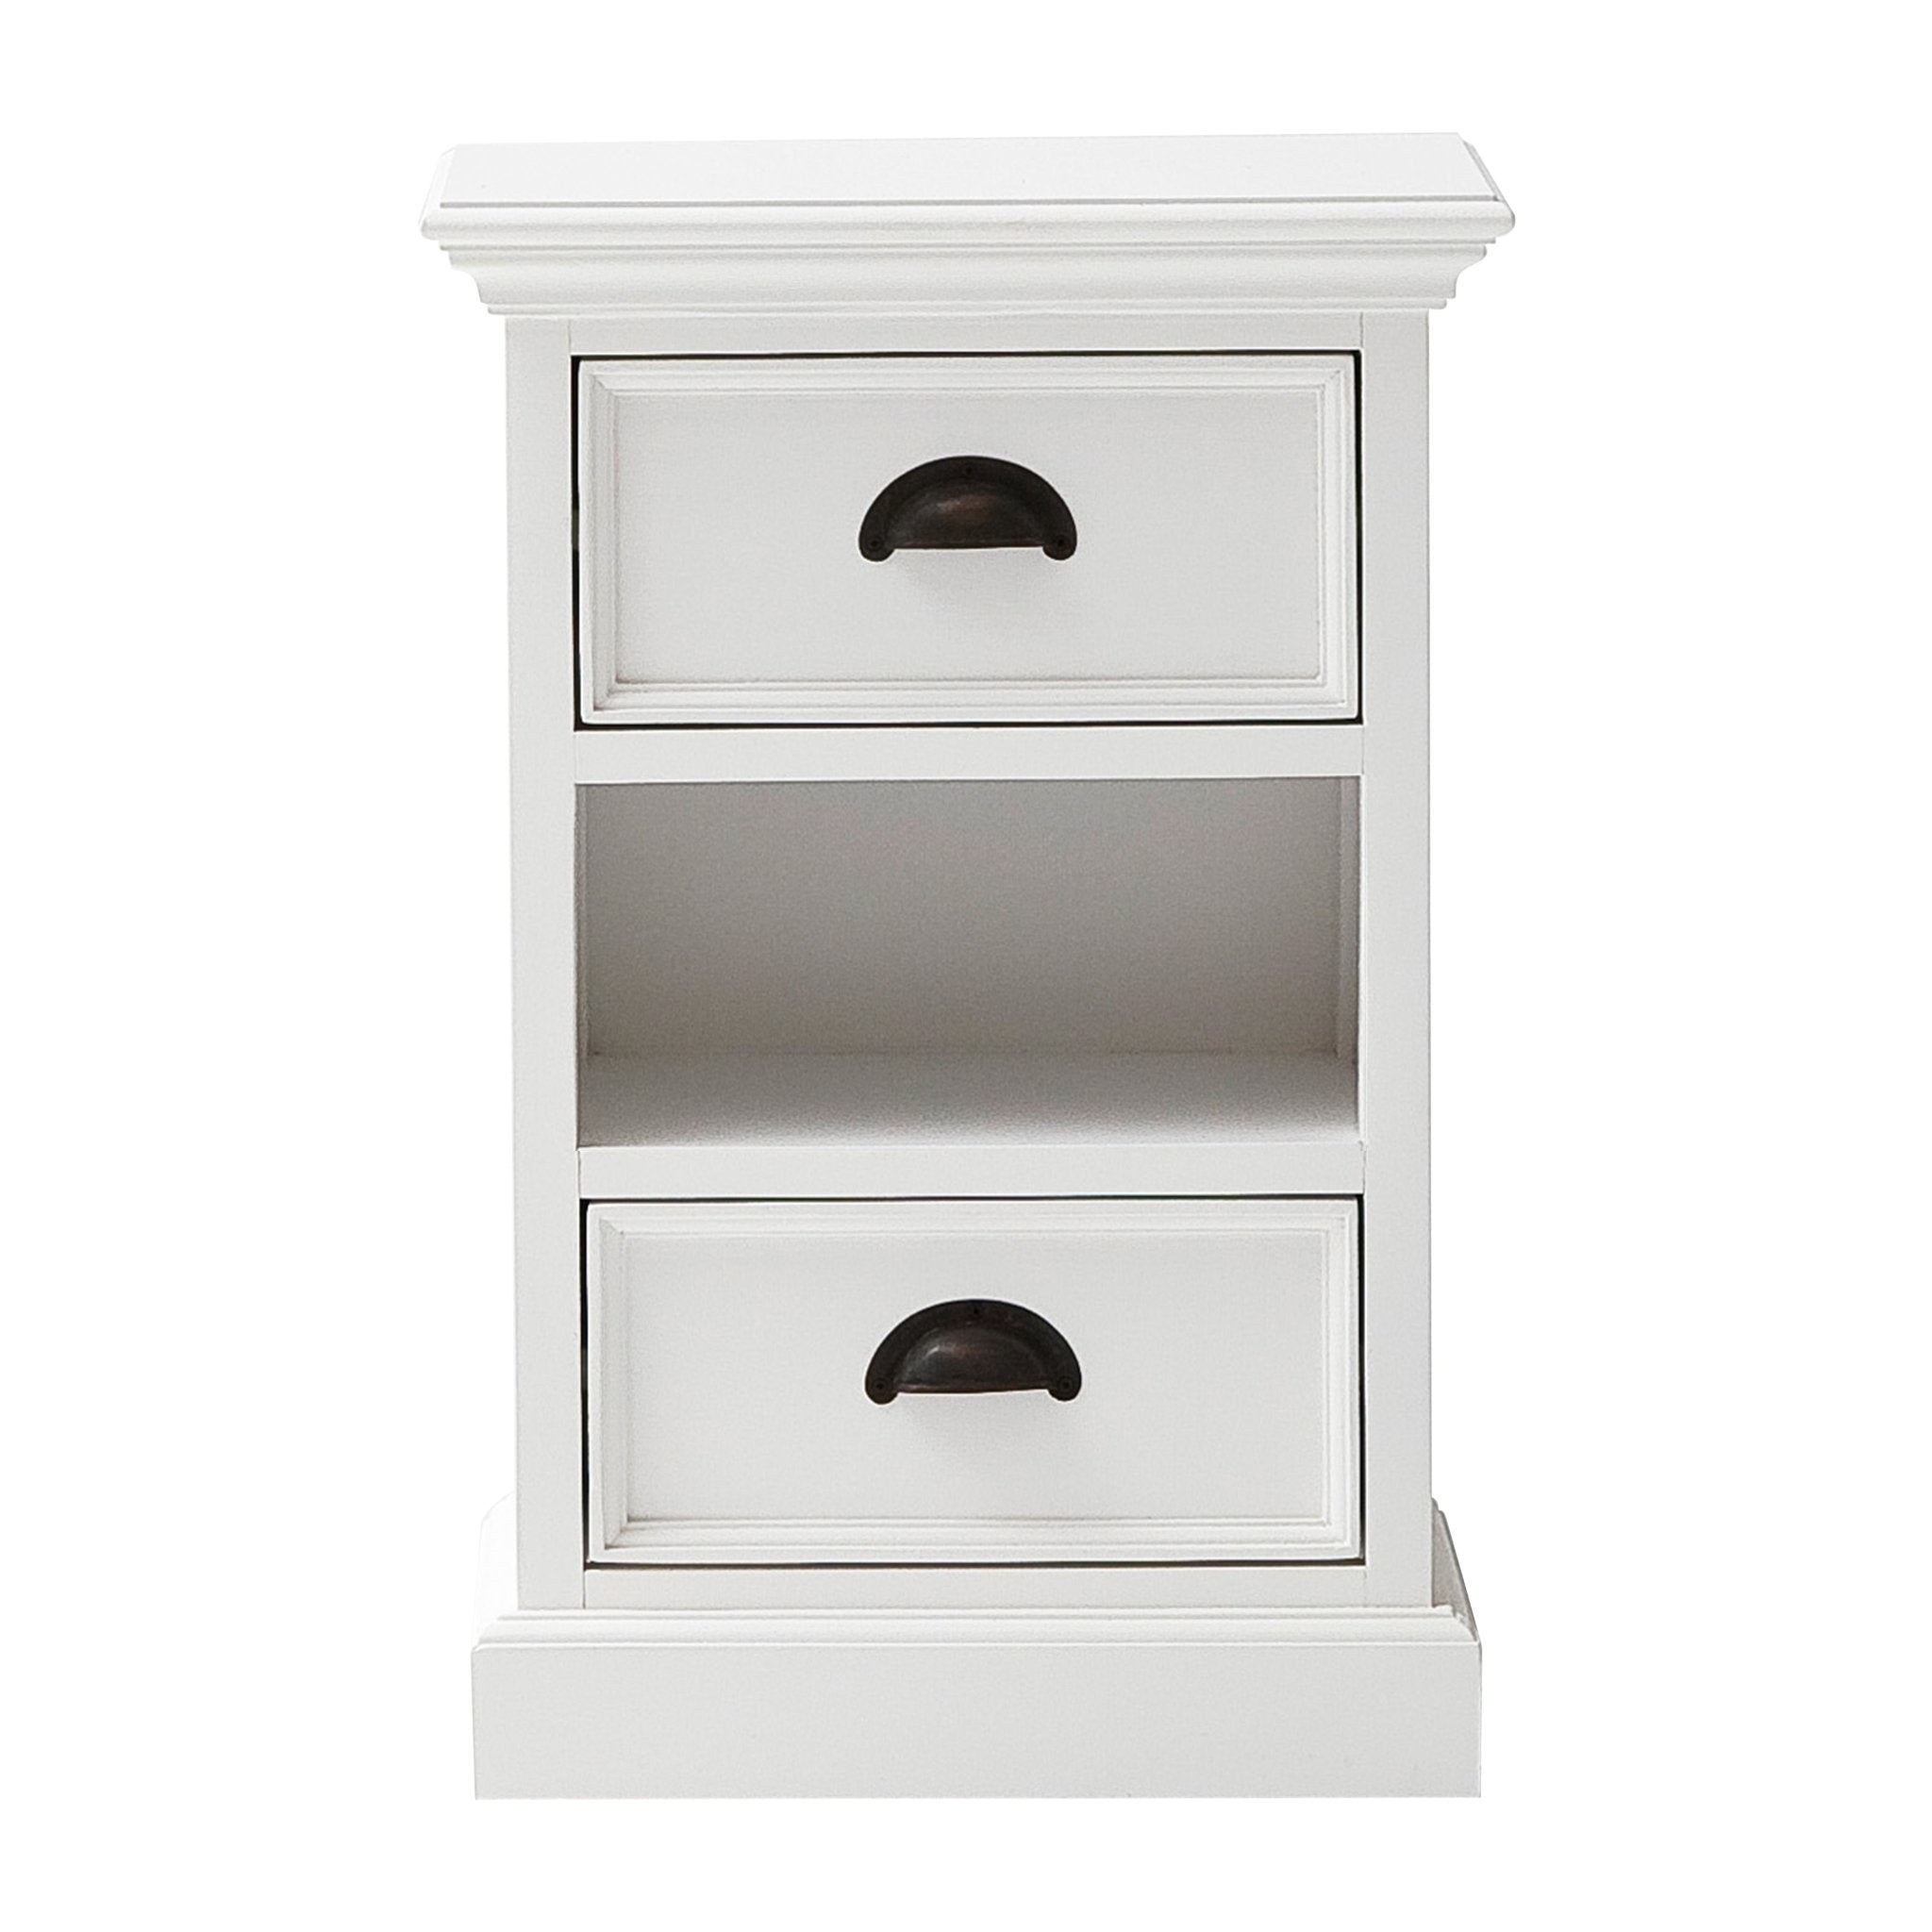 Halifax White Painted Bedside Cabinet with Rattan Basket - Duck Barn Interiors